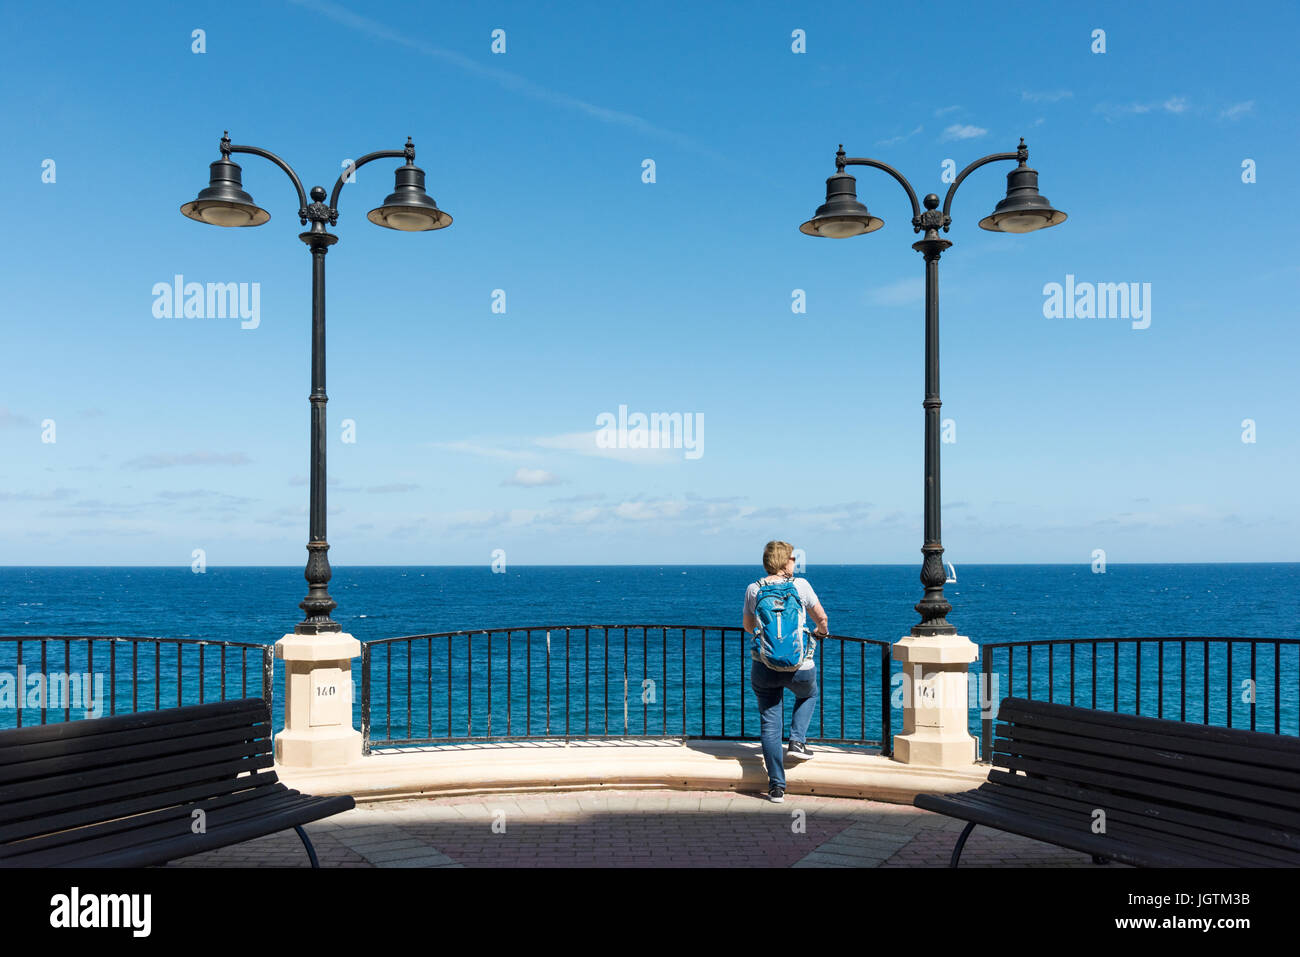 A woman looking out to sea on the promenade on the coast at Sliema Malta between two lamposts Stock Photo